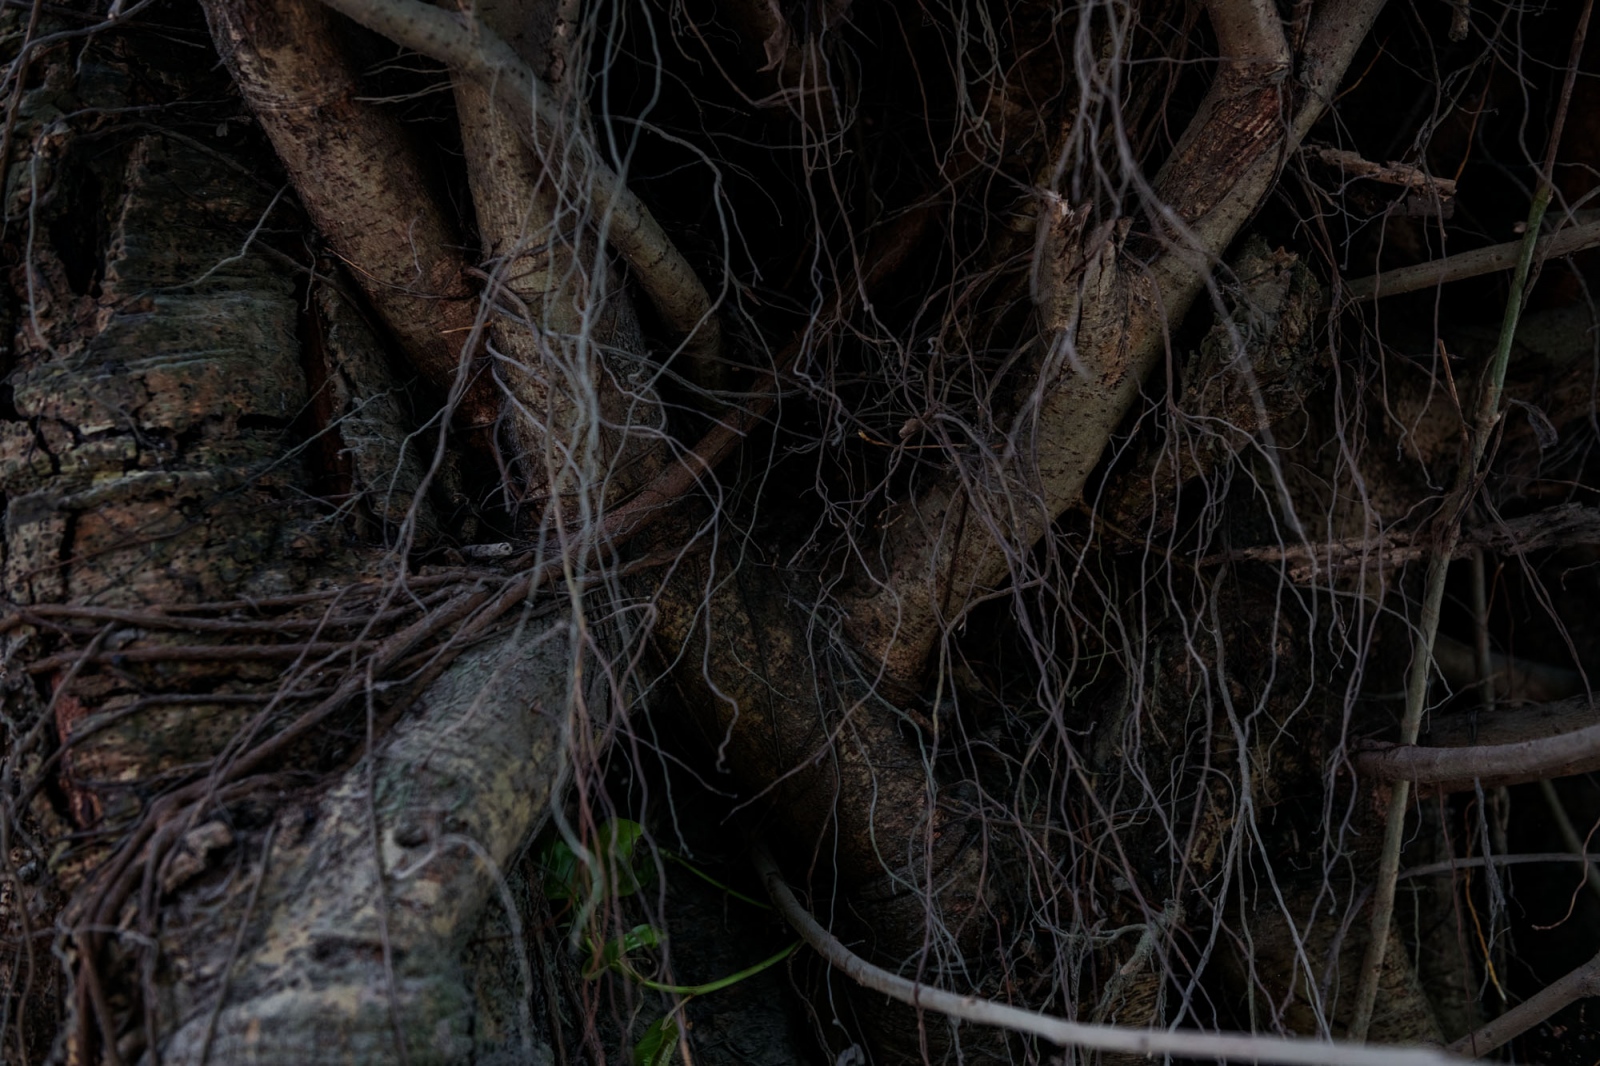 Tangled roots on a tree outside Silchar, Assam, India.